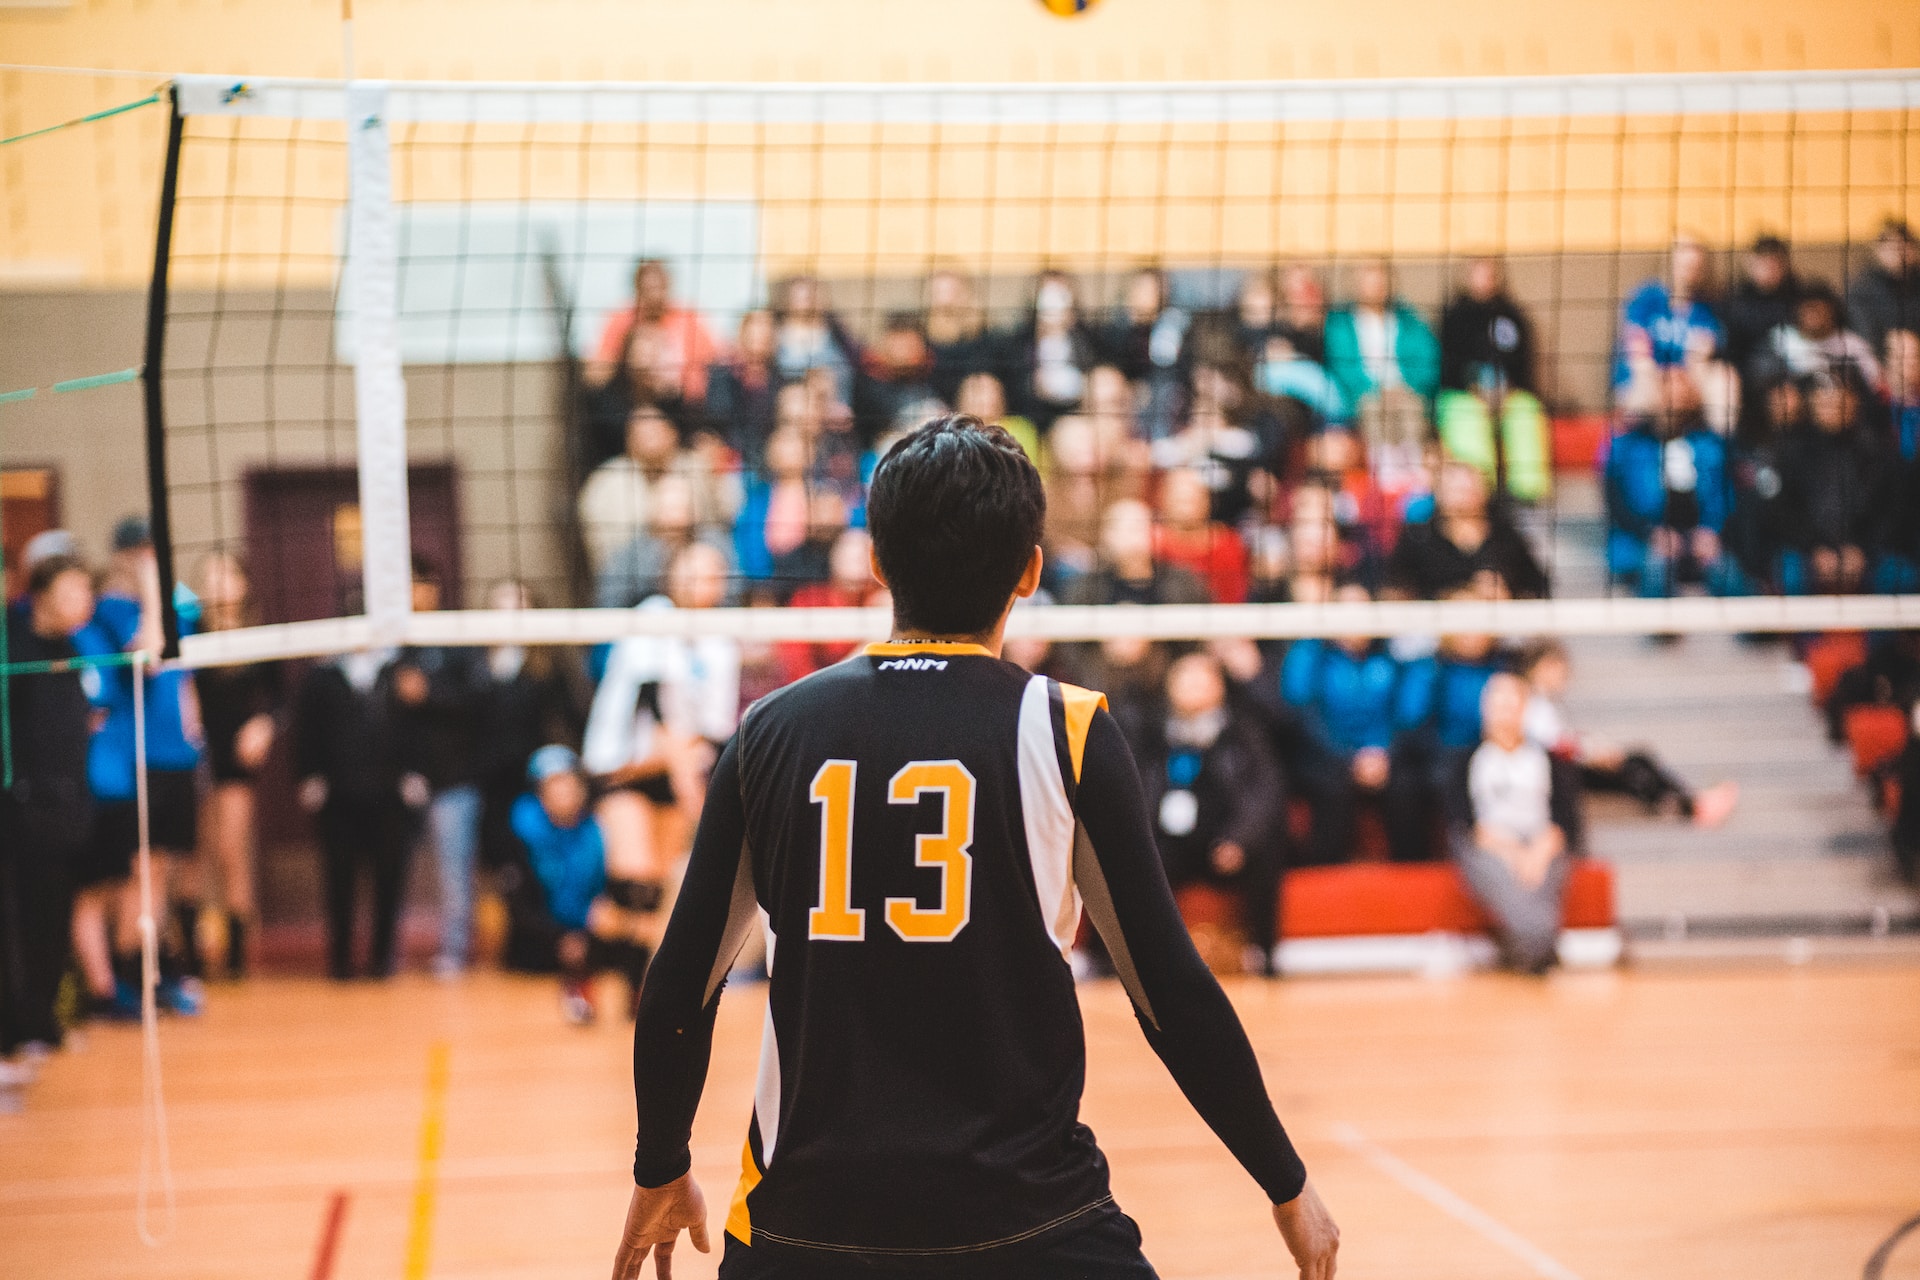 student playing college sport, standing in front of volleyball net